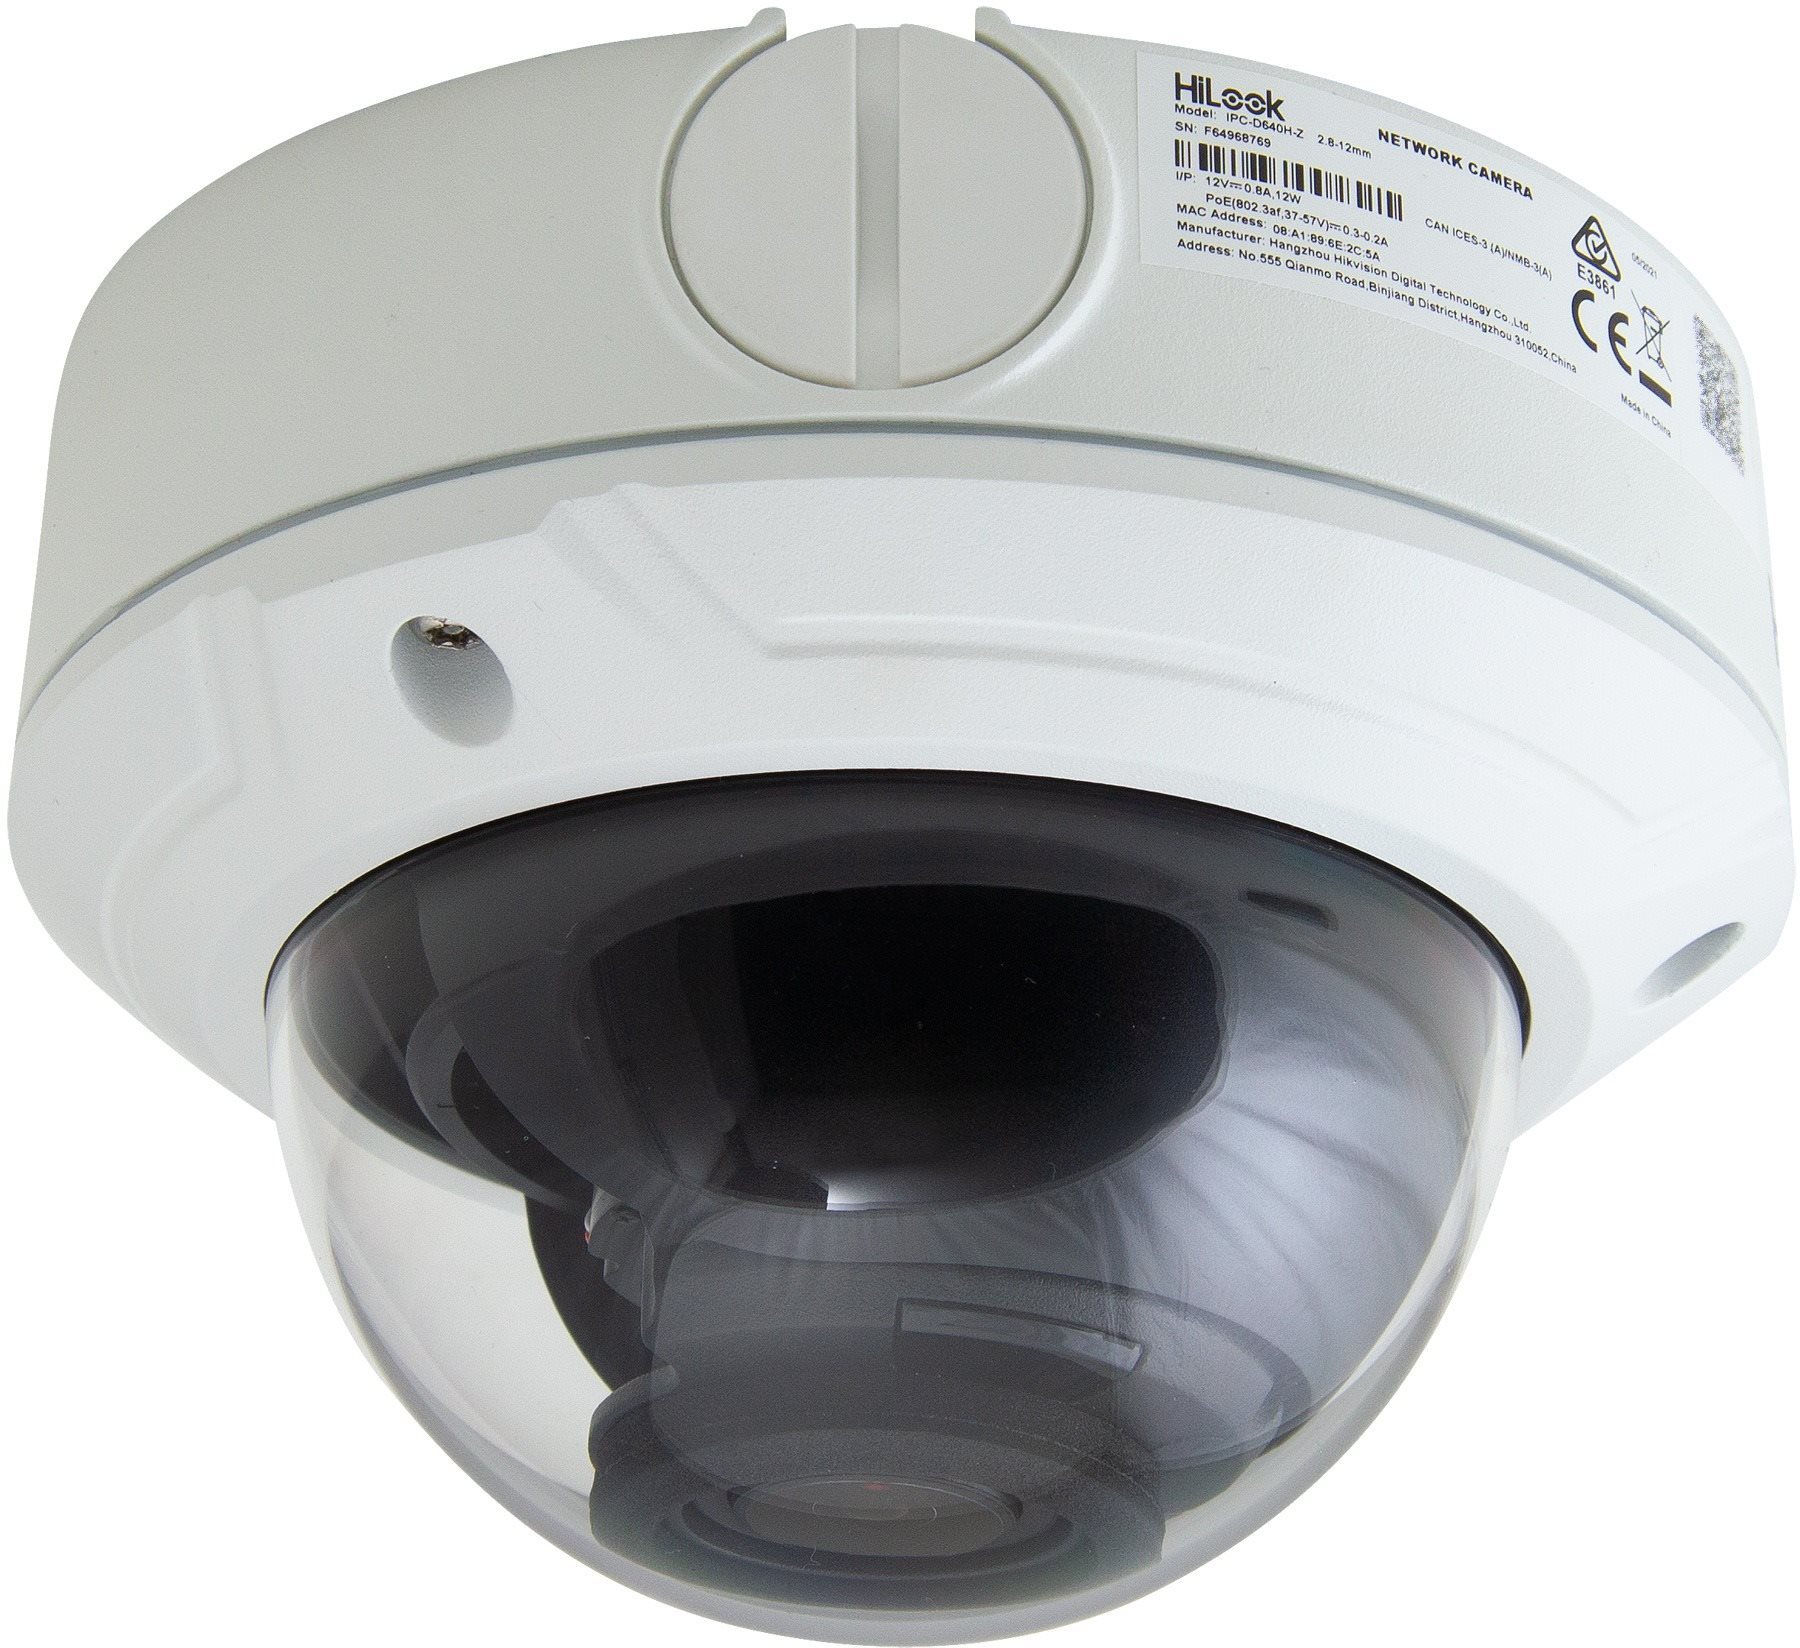 IP Camera HIKVISION HiLook IPC-D640H-Z Lateral view